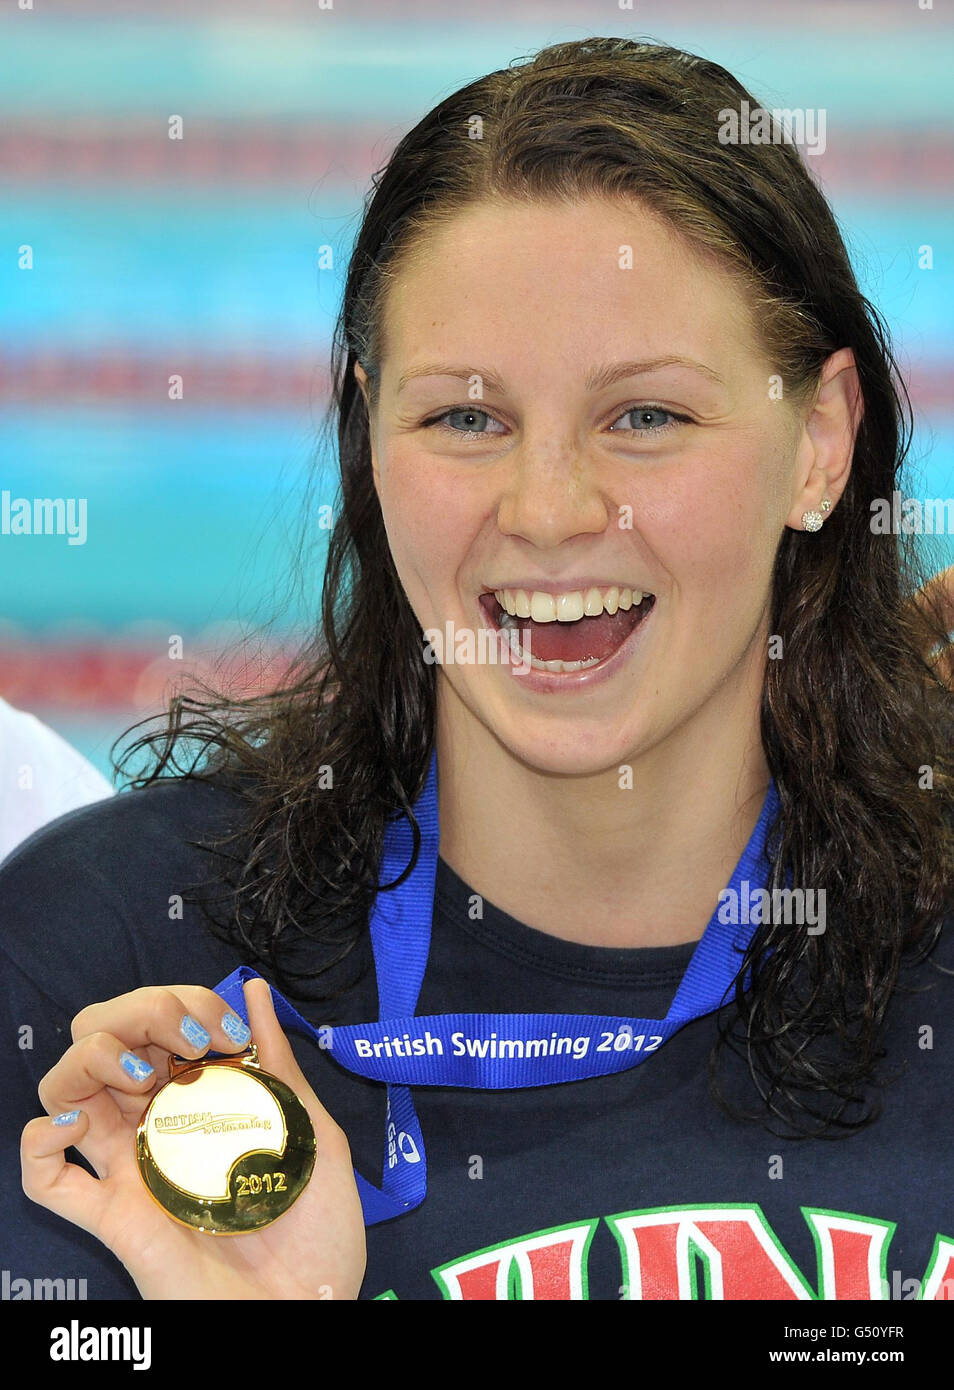 Ellen Gandy with the Gold medal after winning of the women's 100m Butterfly during the British Gas Swimming Championships at the Aquatics Centre in the Olympic Park, London. Stock Photo